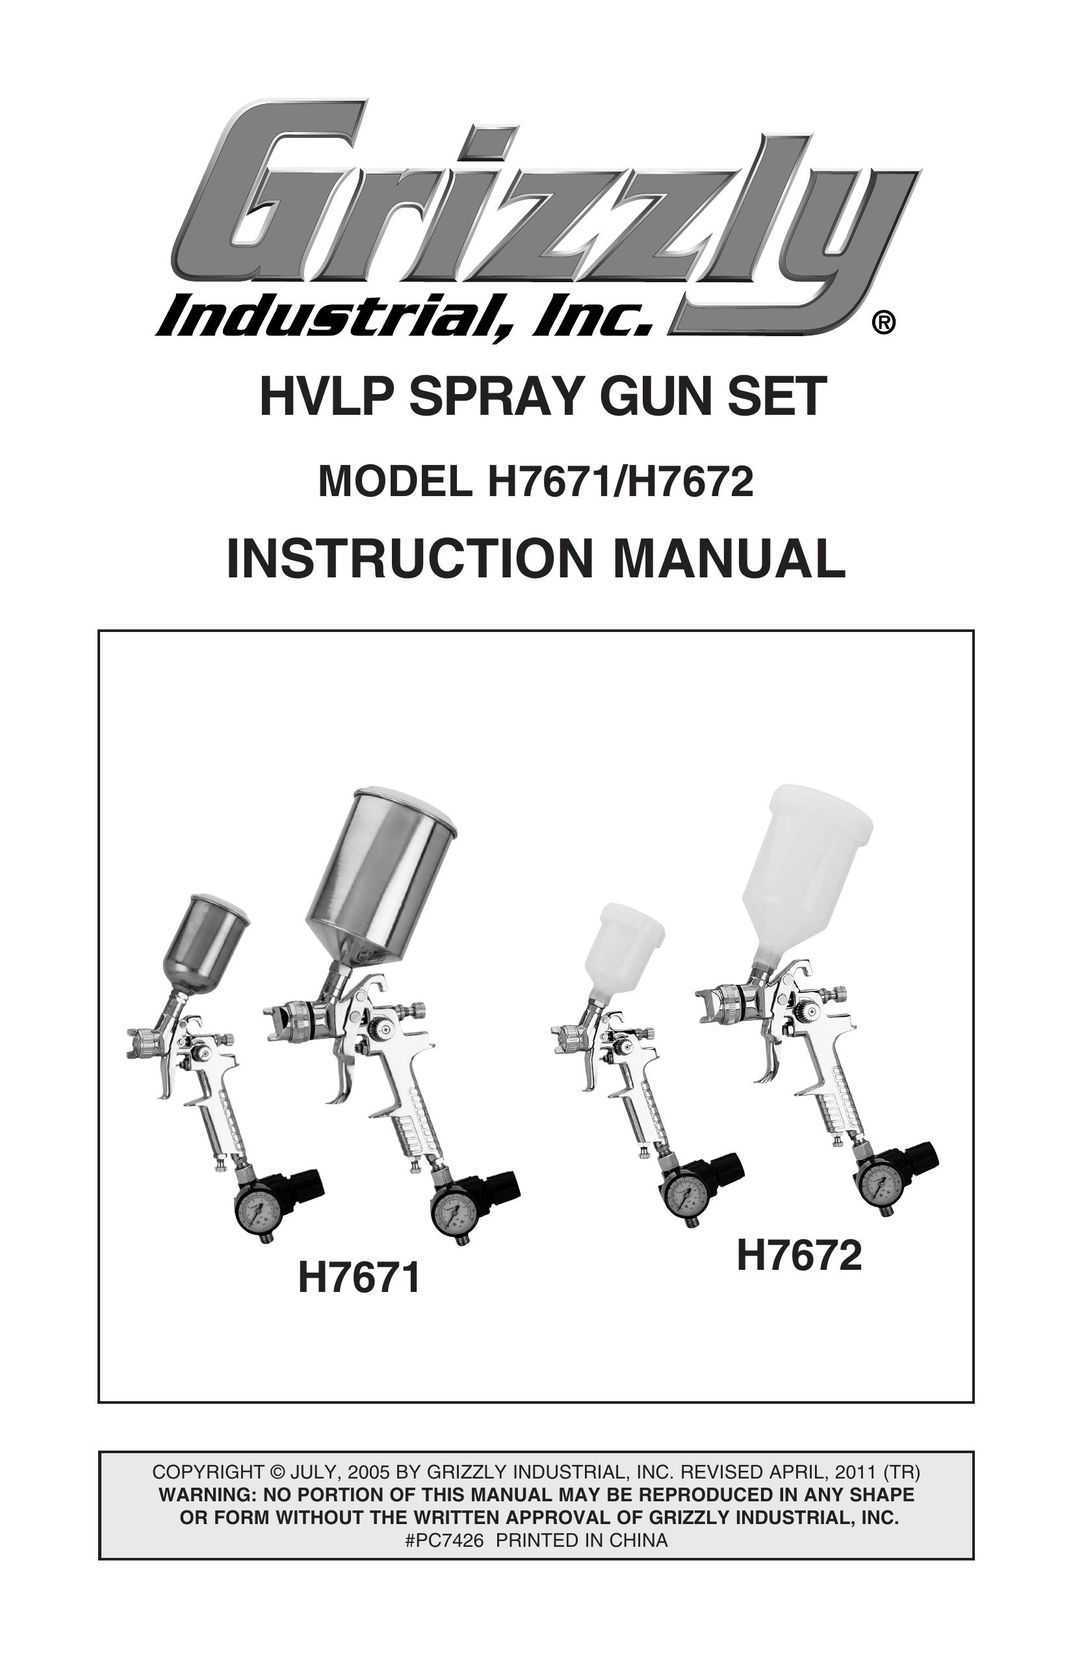 Grizzly H7671 Paint Sprayer User Manual